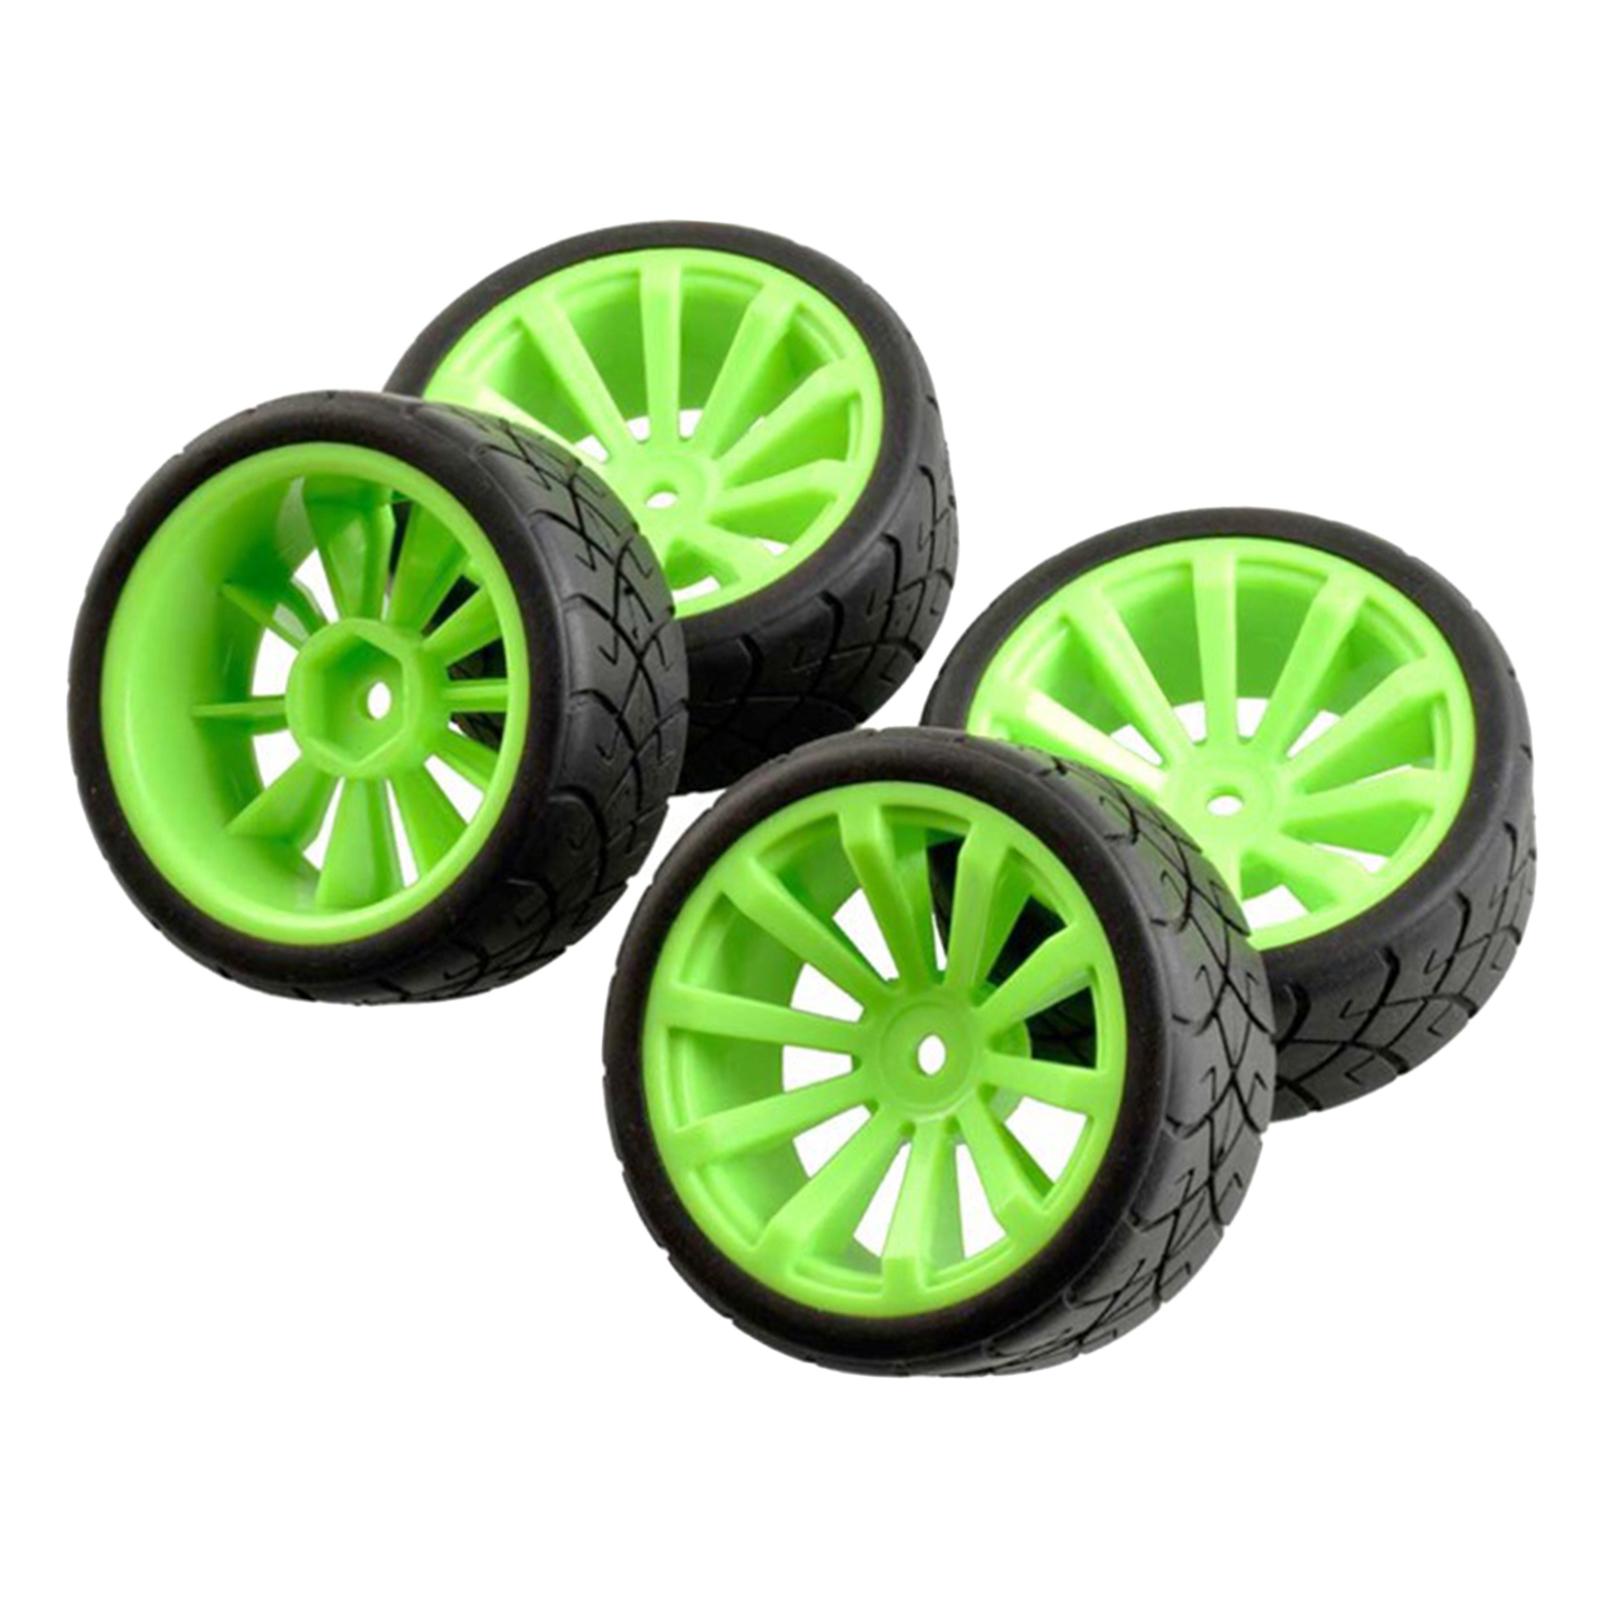 4 Pieces 144001124018124019 for 1:10 Rubber Tire RC Car , Green - image 3 of 7